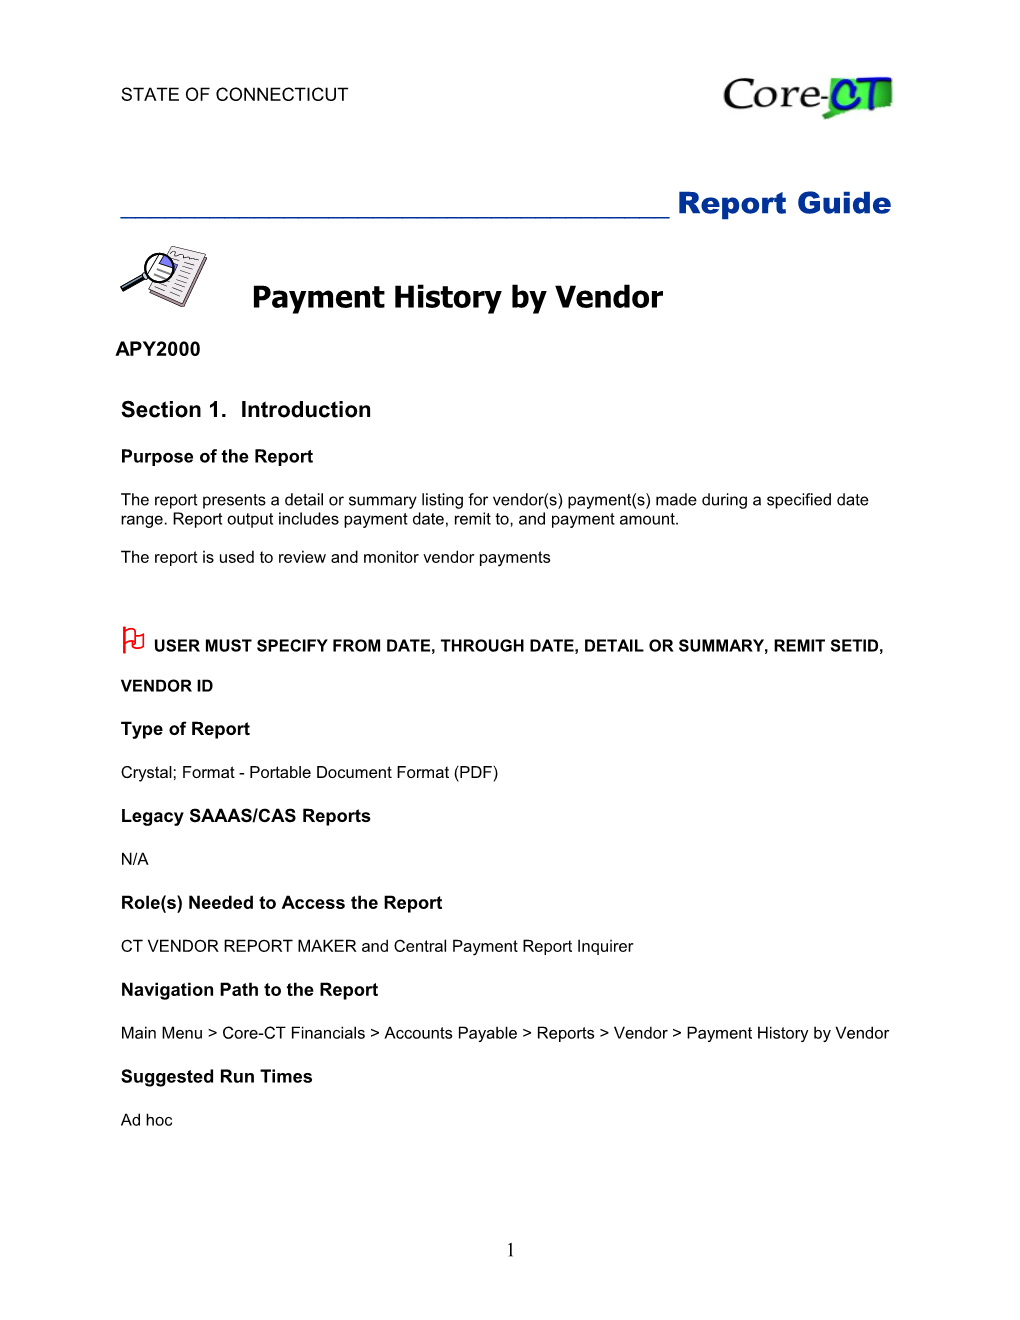 Payment History by Vendor (APY2000)